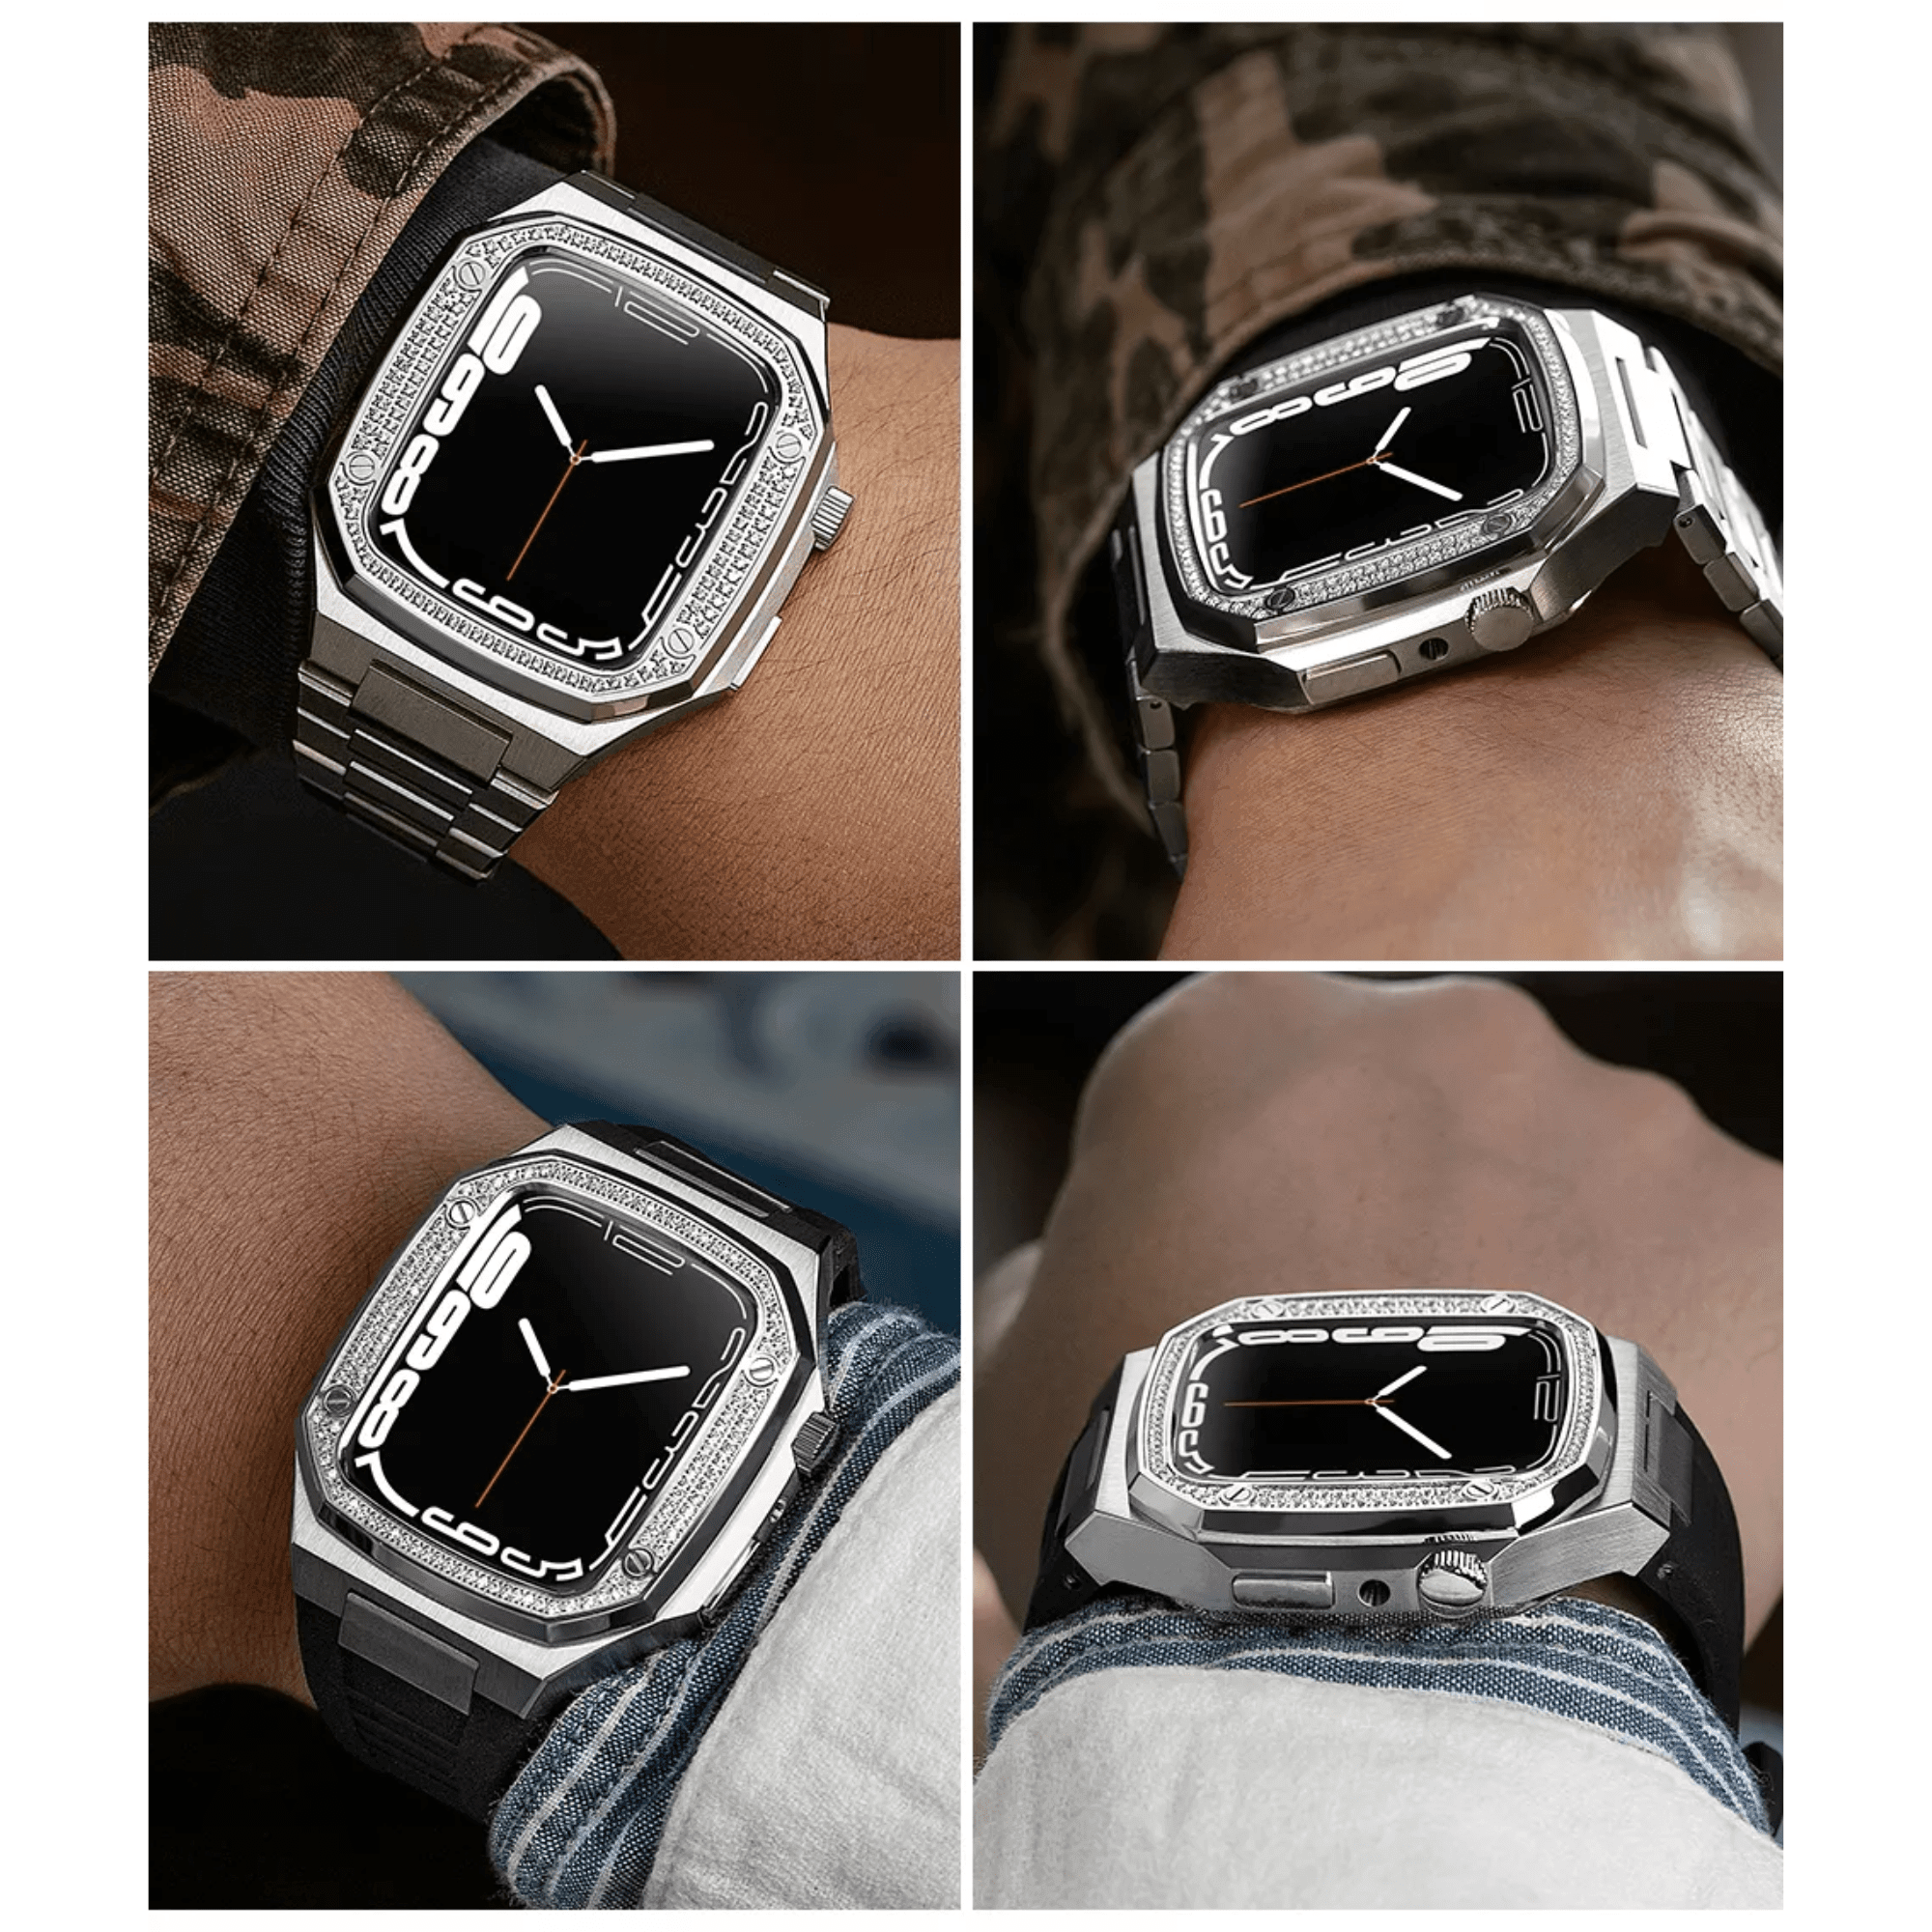 Luxury Metal Mod Kit for Apple Watch | Case with Jewels, Rubber & Stainless Steel Straps | Apple Watch 7/8 - 45 mm| Silver case - Black Band mod kits india dream watches apple watch